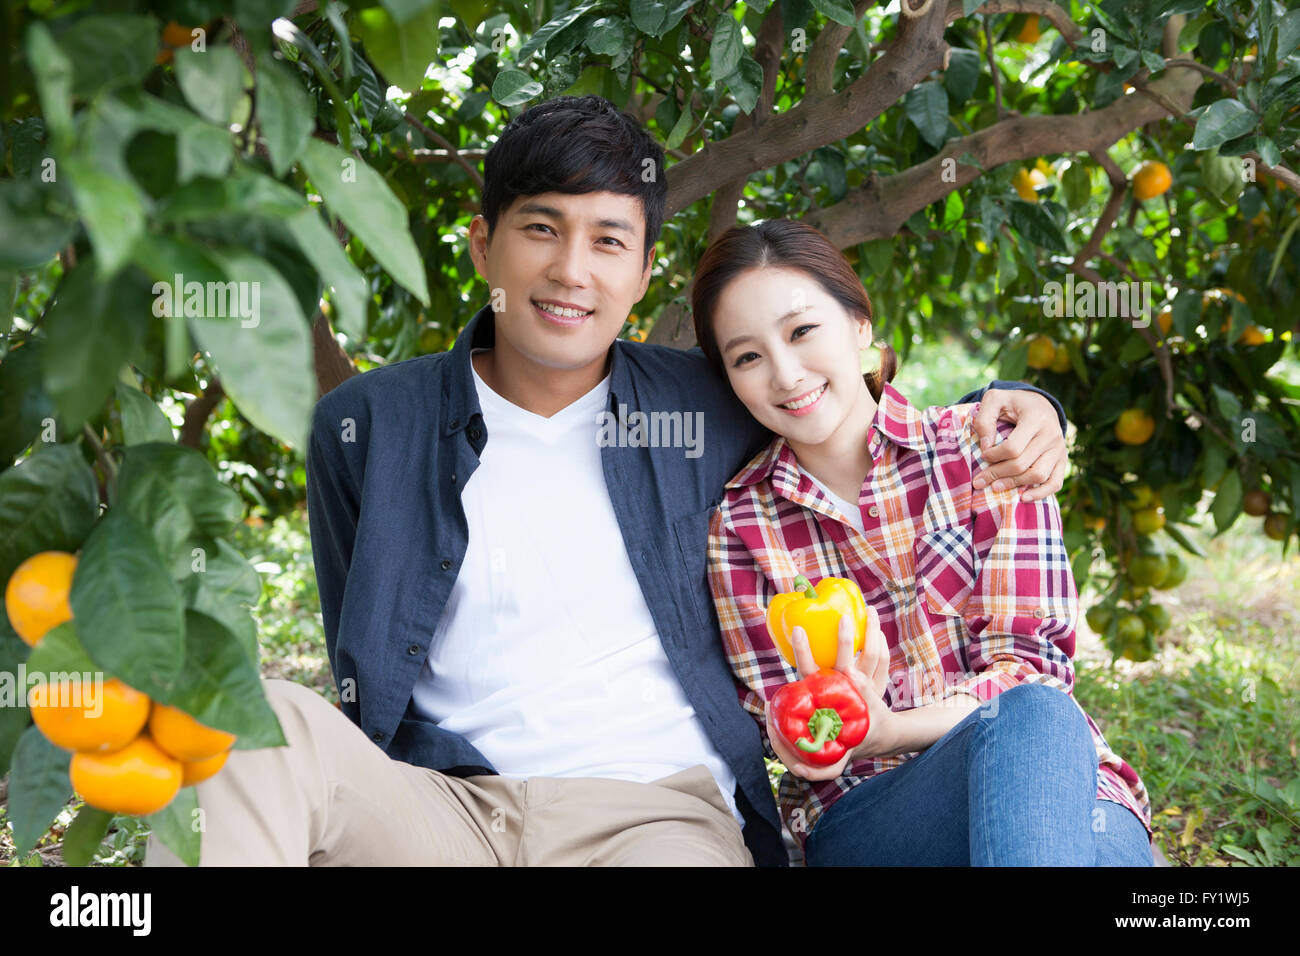 Couple with sweet peppers seated under the tangerine tree and smiling together Stock Photo